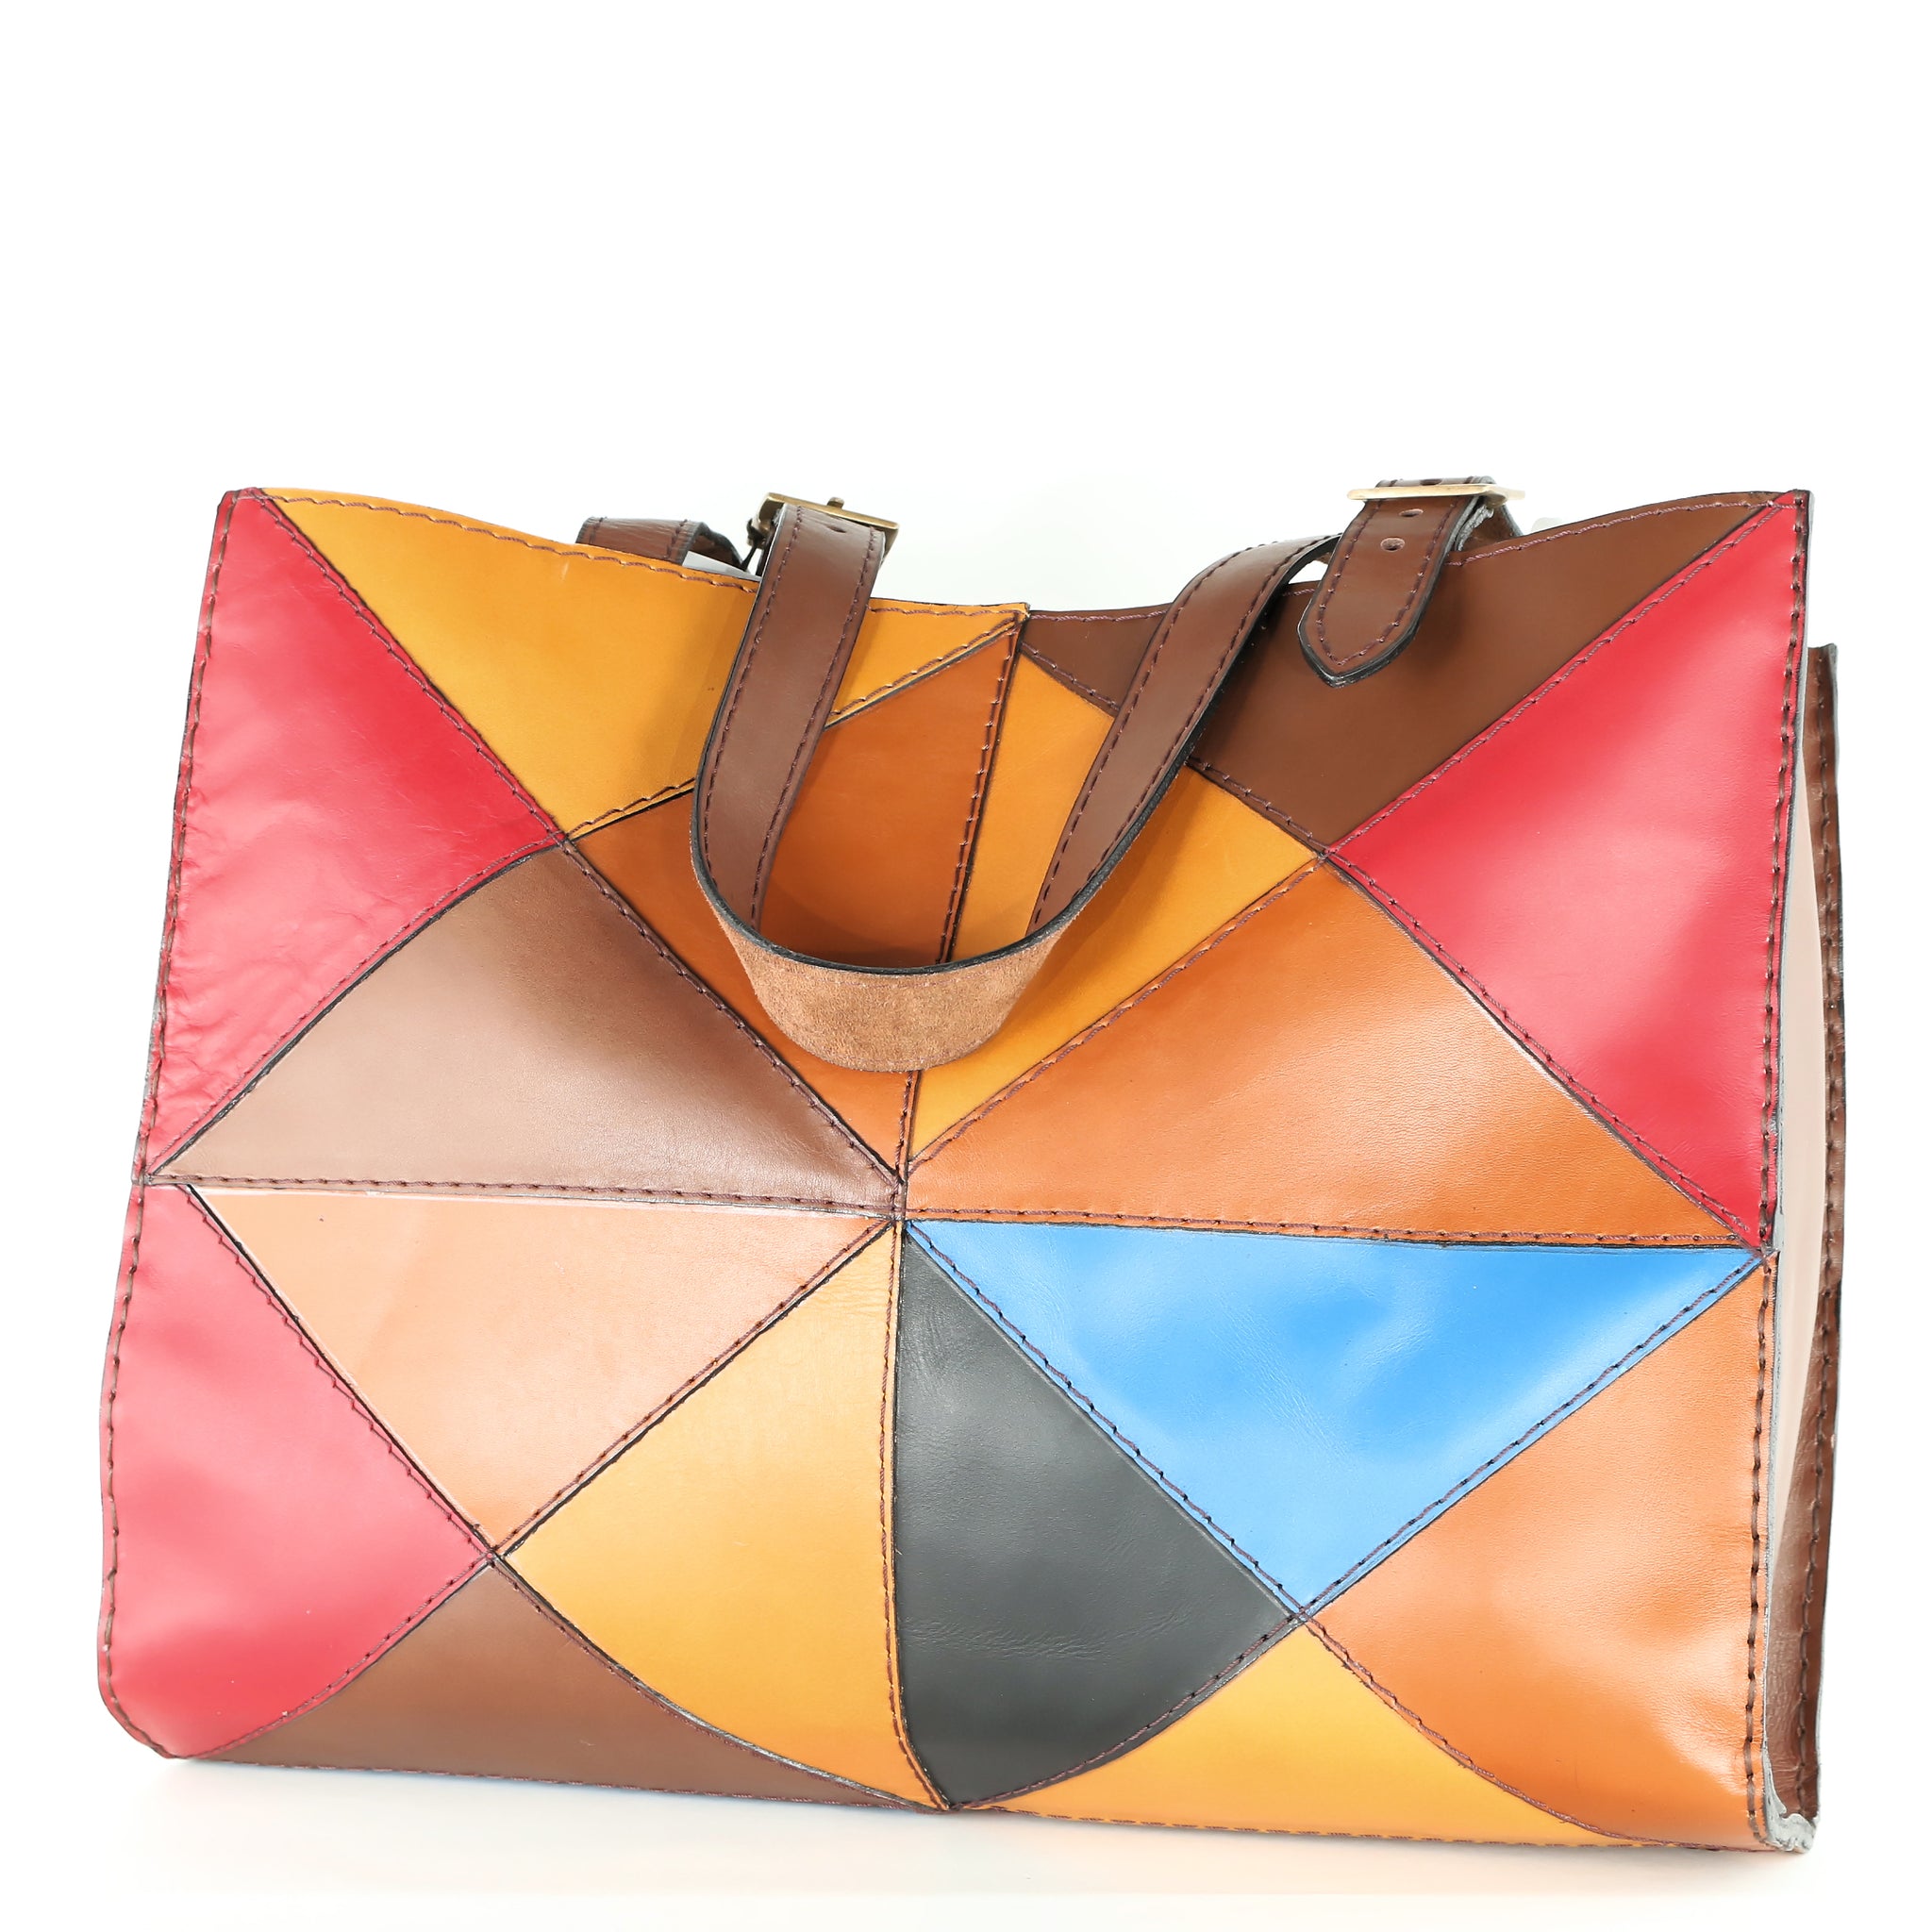 Leather Tote Bag In Patchwork Pattern. ⋆ Spend With Us - Buy From a Bush  Business Marketplace